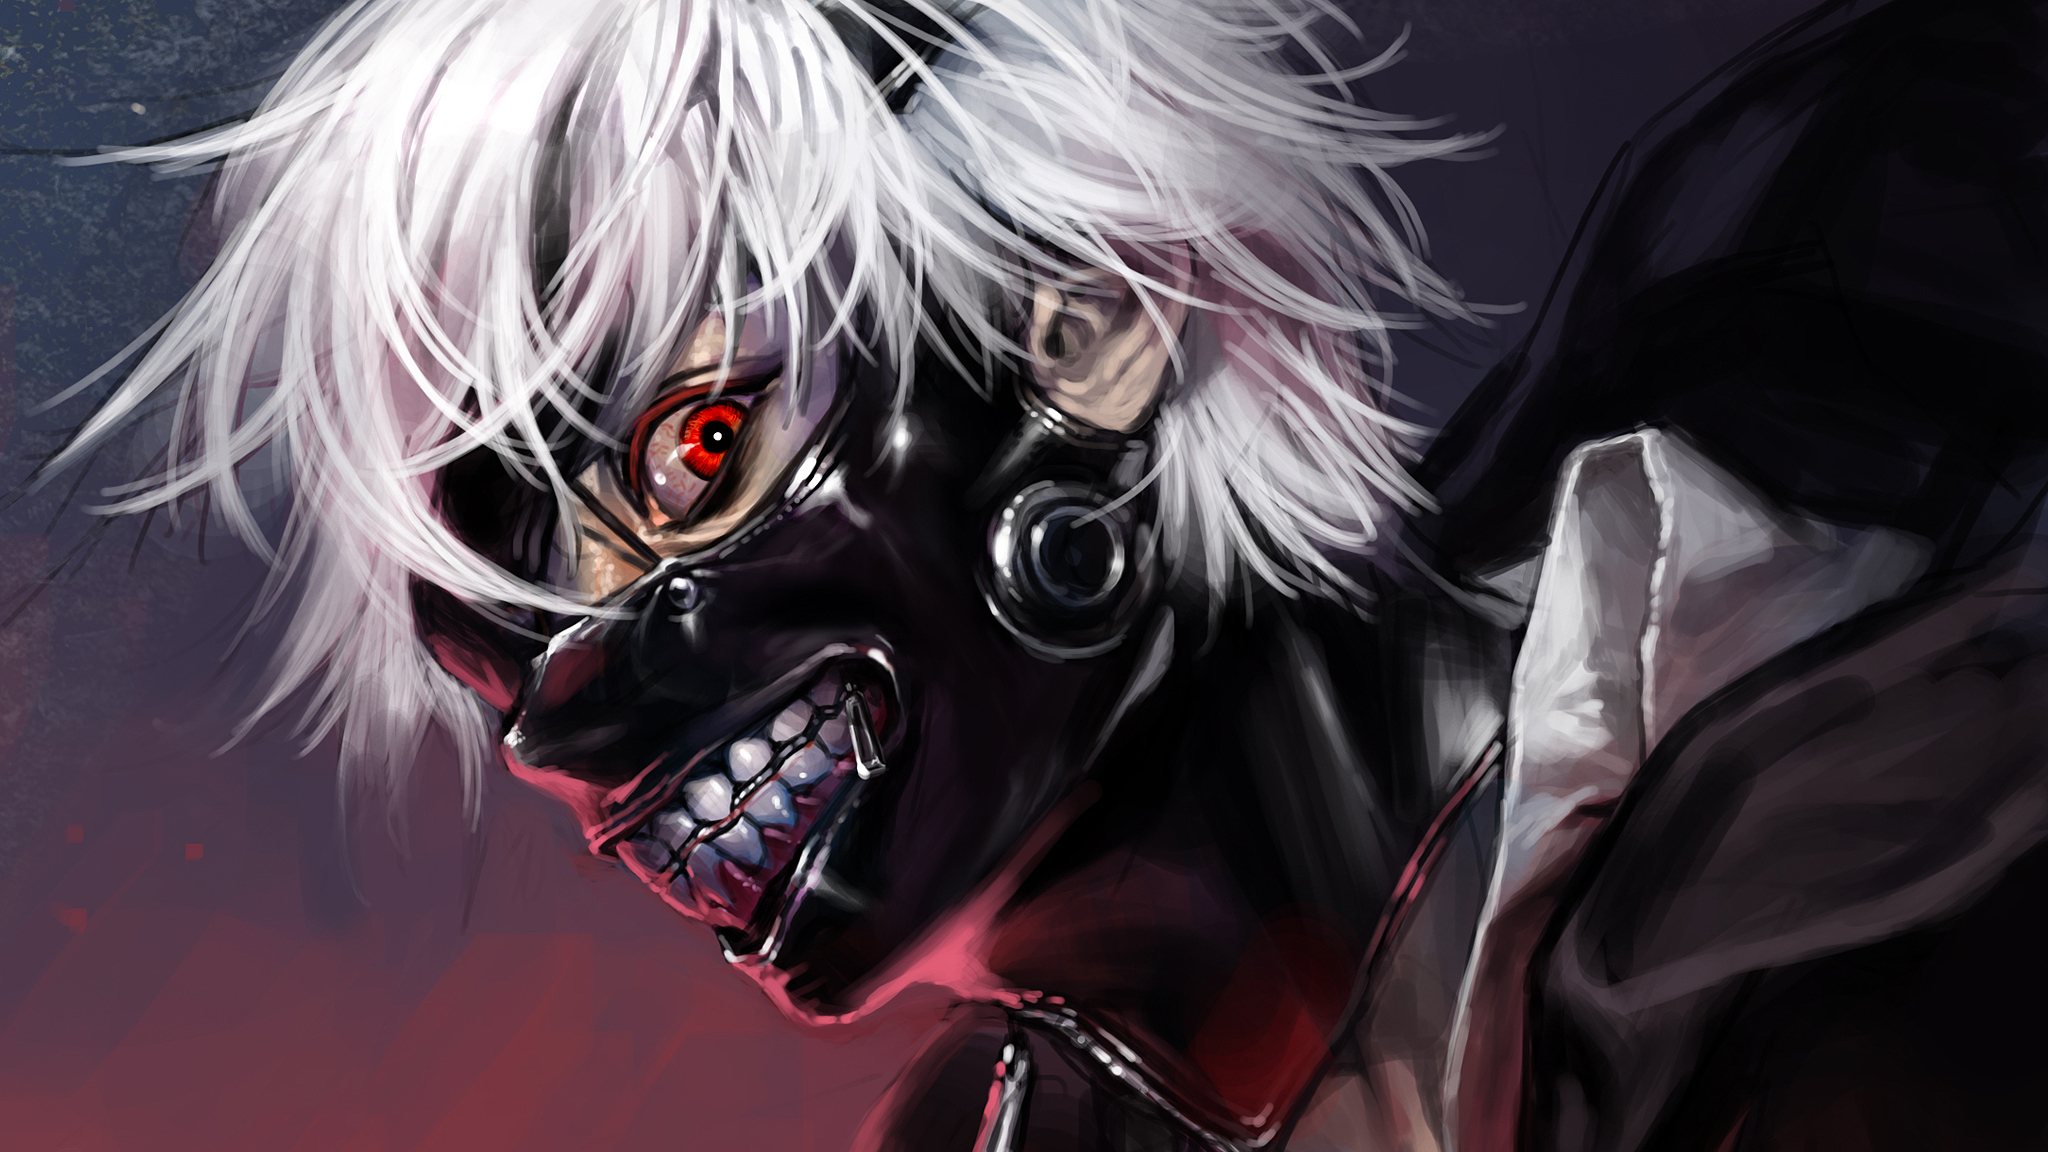 Tokyo Ghoul Anime Wallpapers - Wallpaper Cave